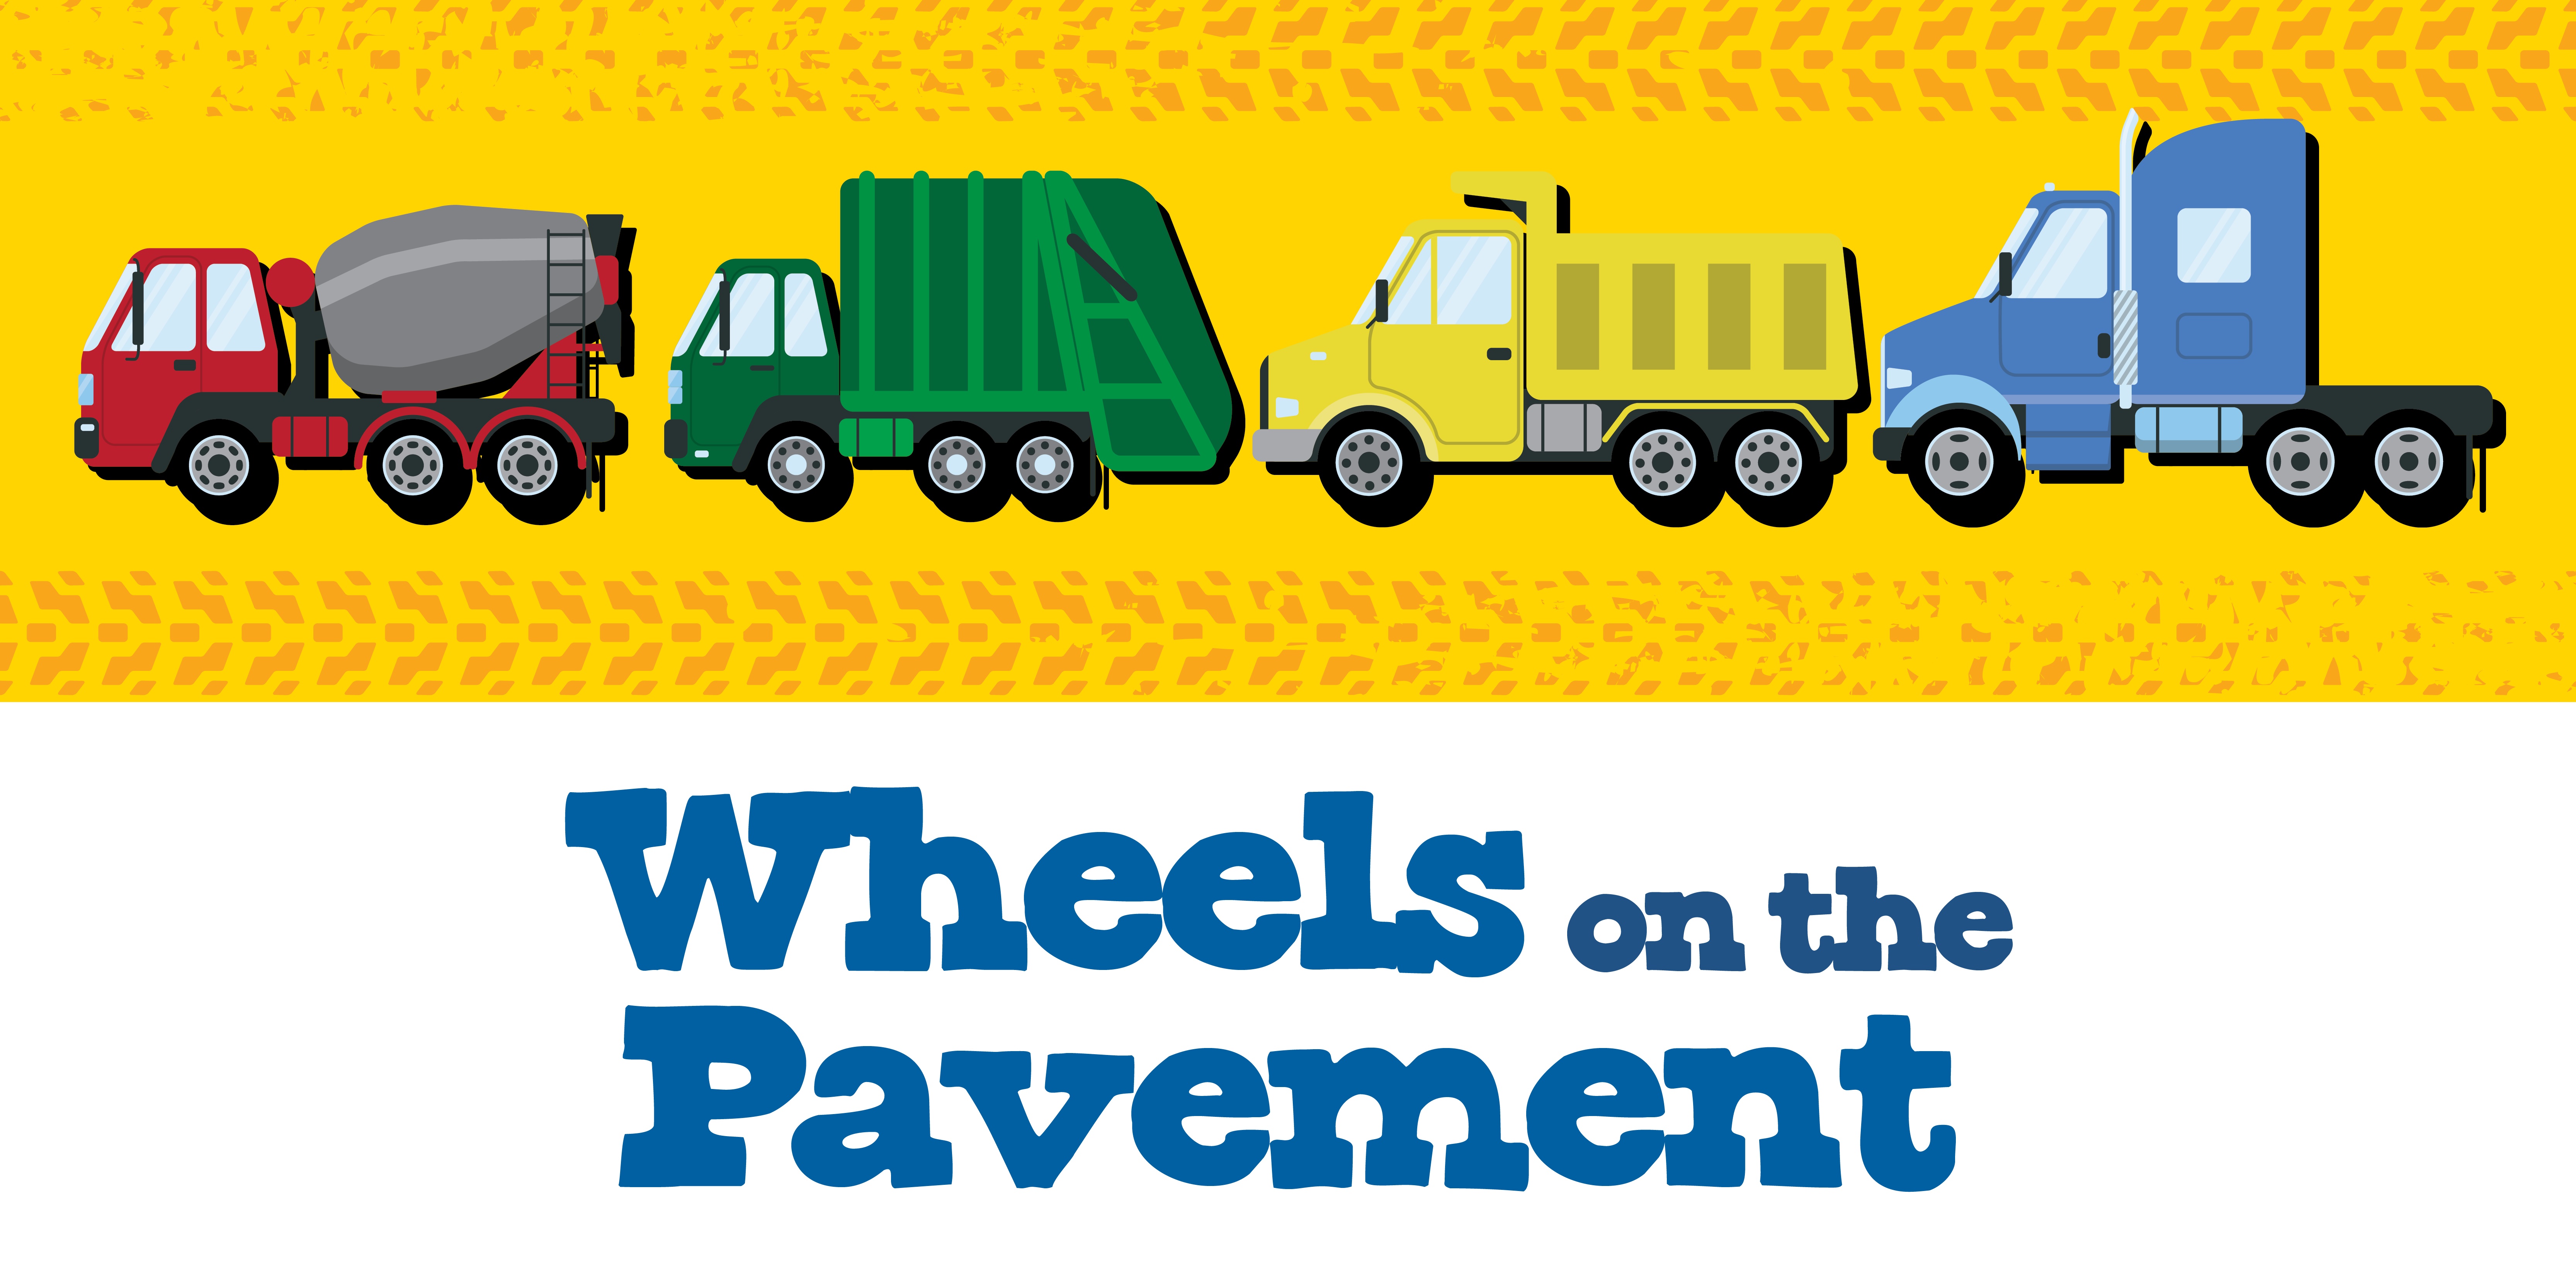 animated trucks and busses for Wheels on the Pavement